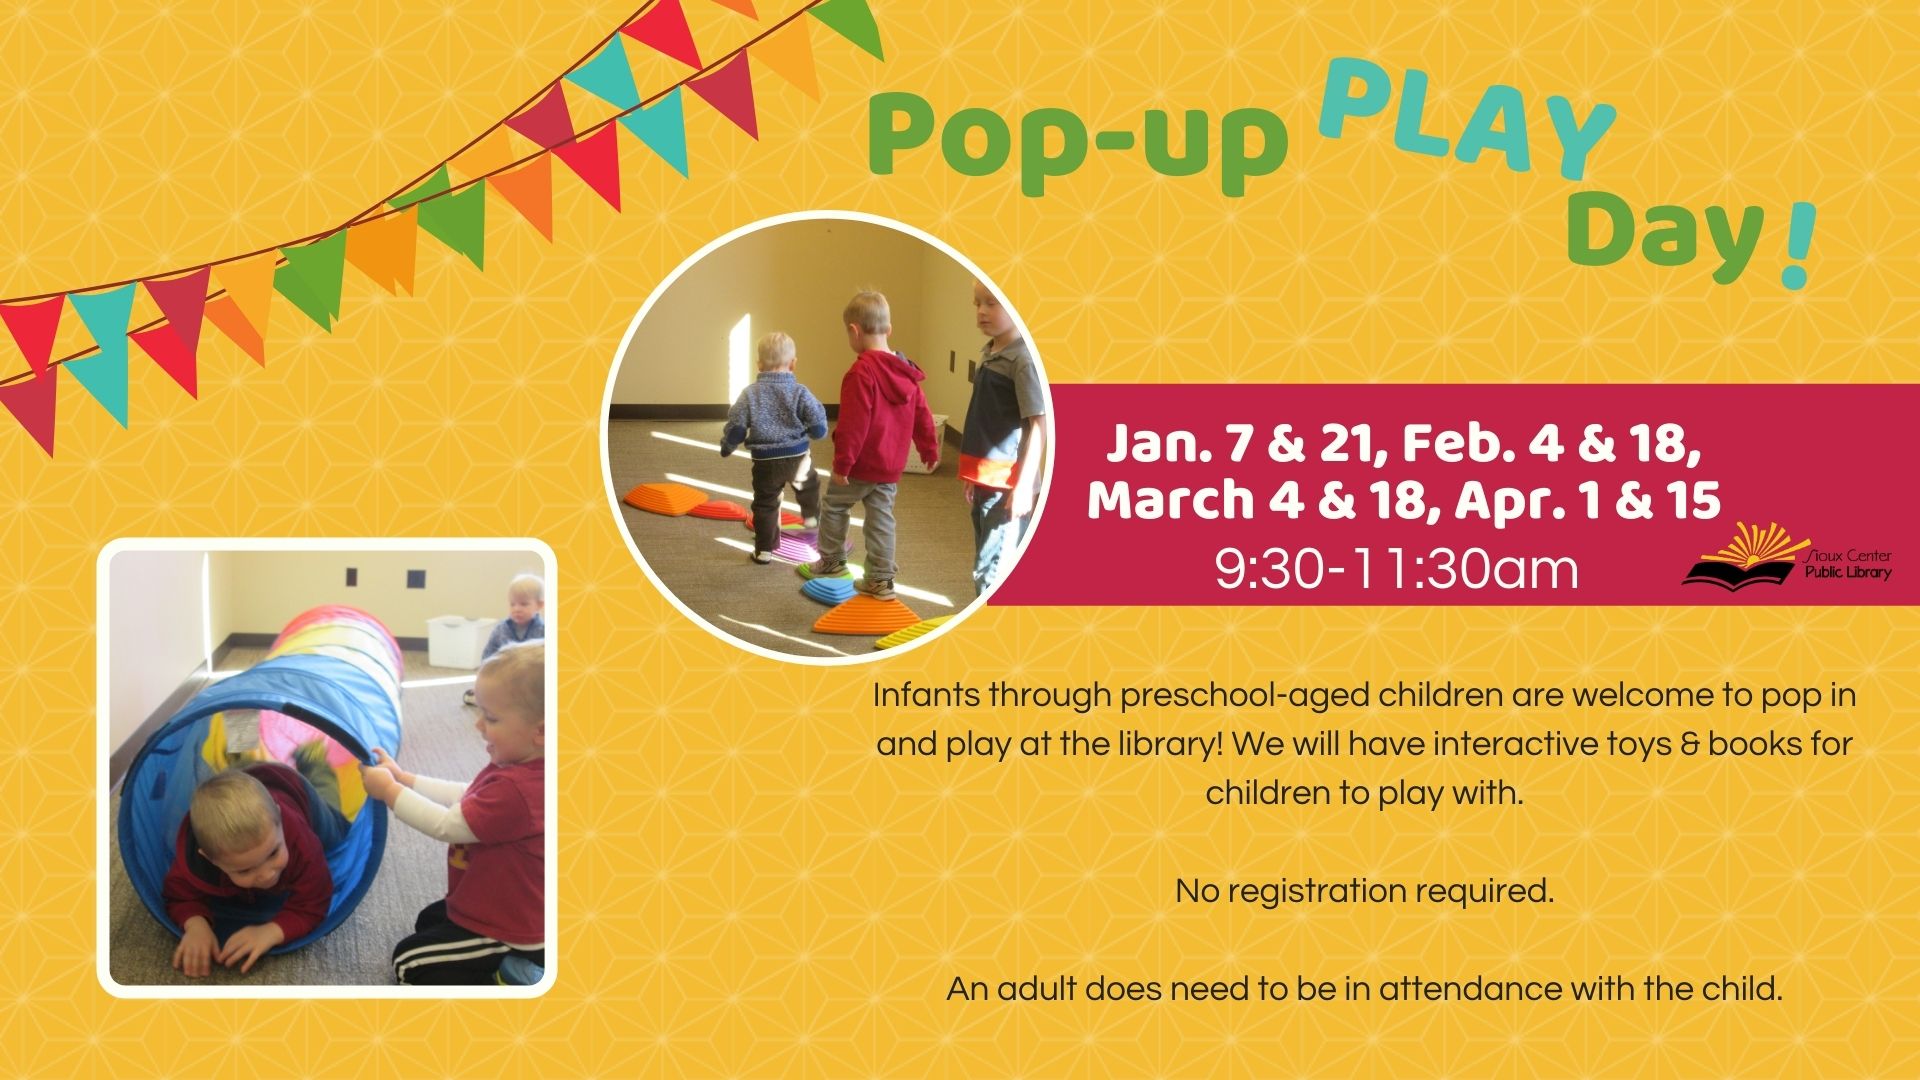 Pop Up Play Day